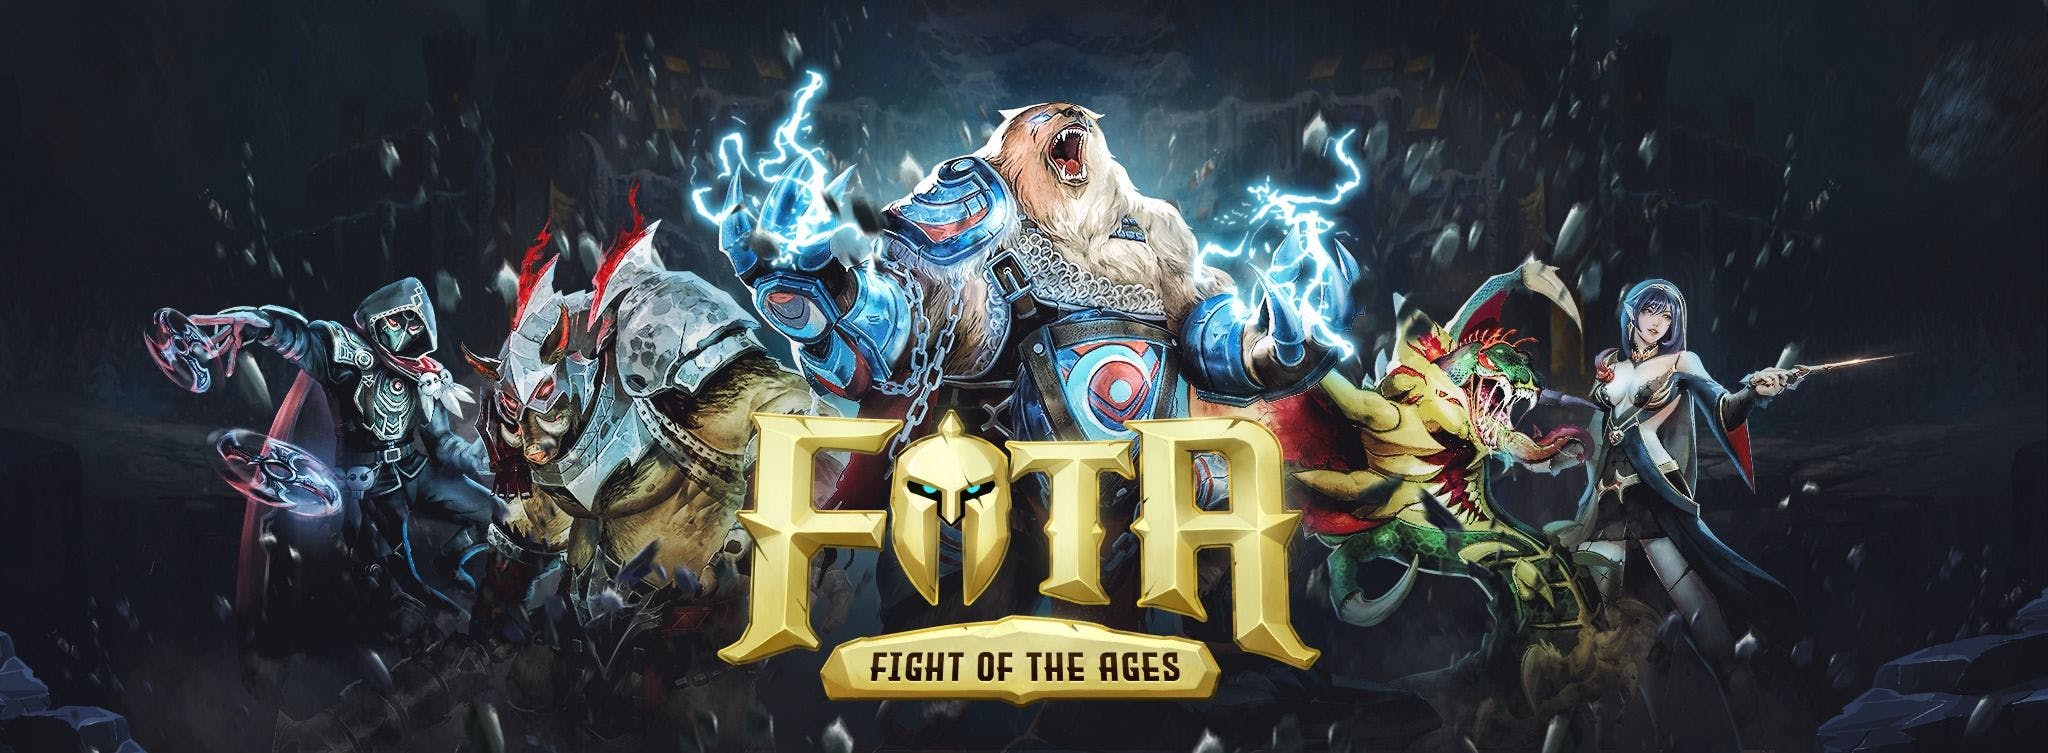 /fight-of-the-ages-is-an-ar-enabled-moba-experience-and-its-coming-soon feature image